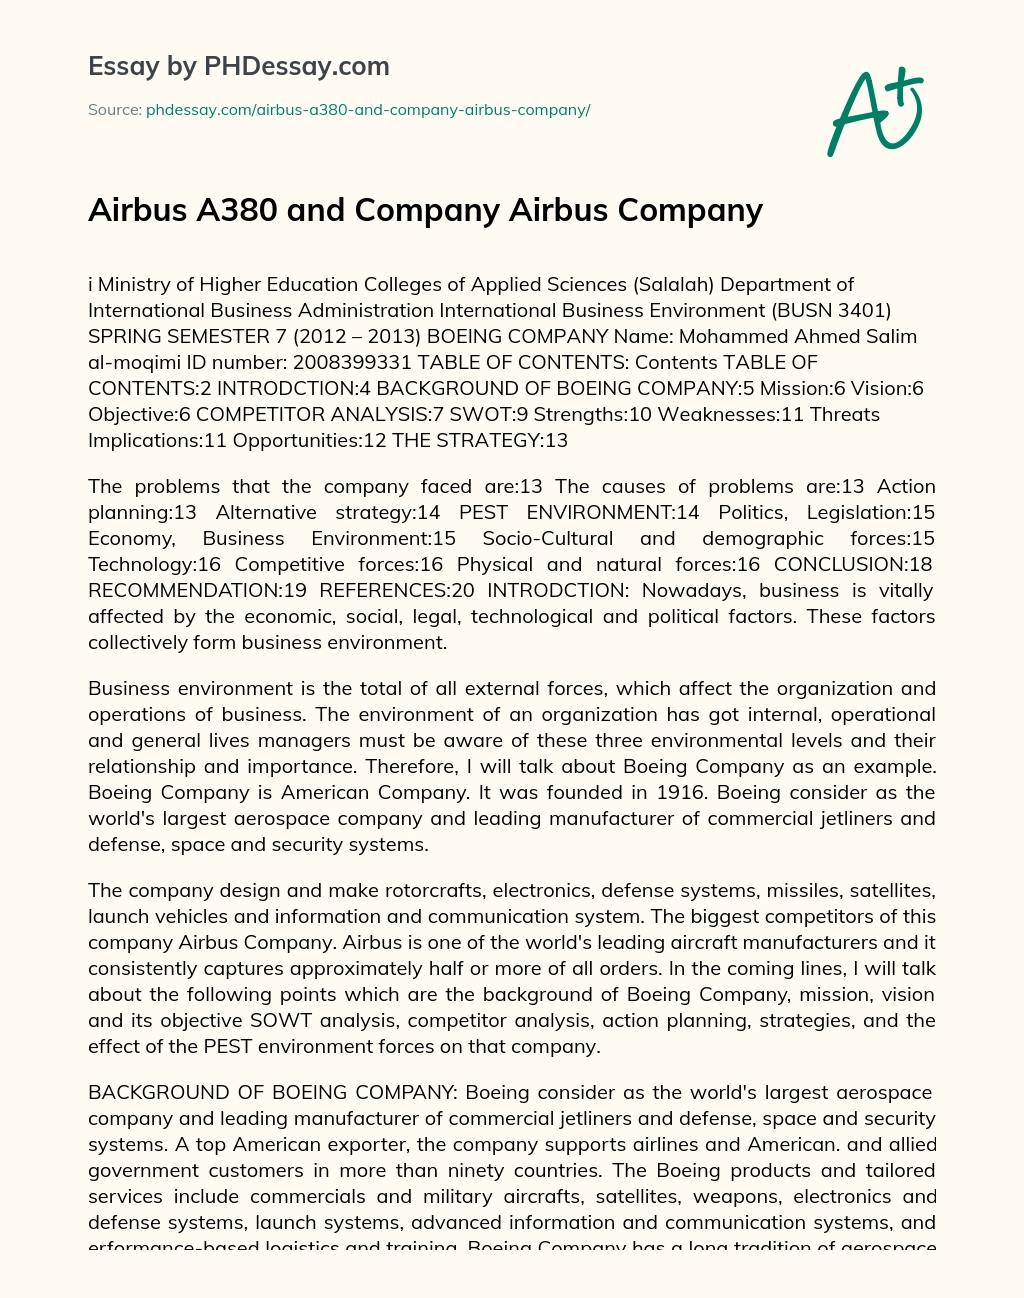 Airbus A380 and Company Airbus Company essay